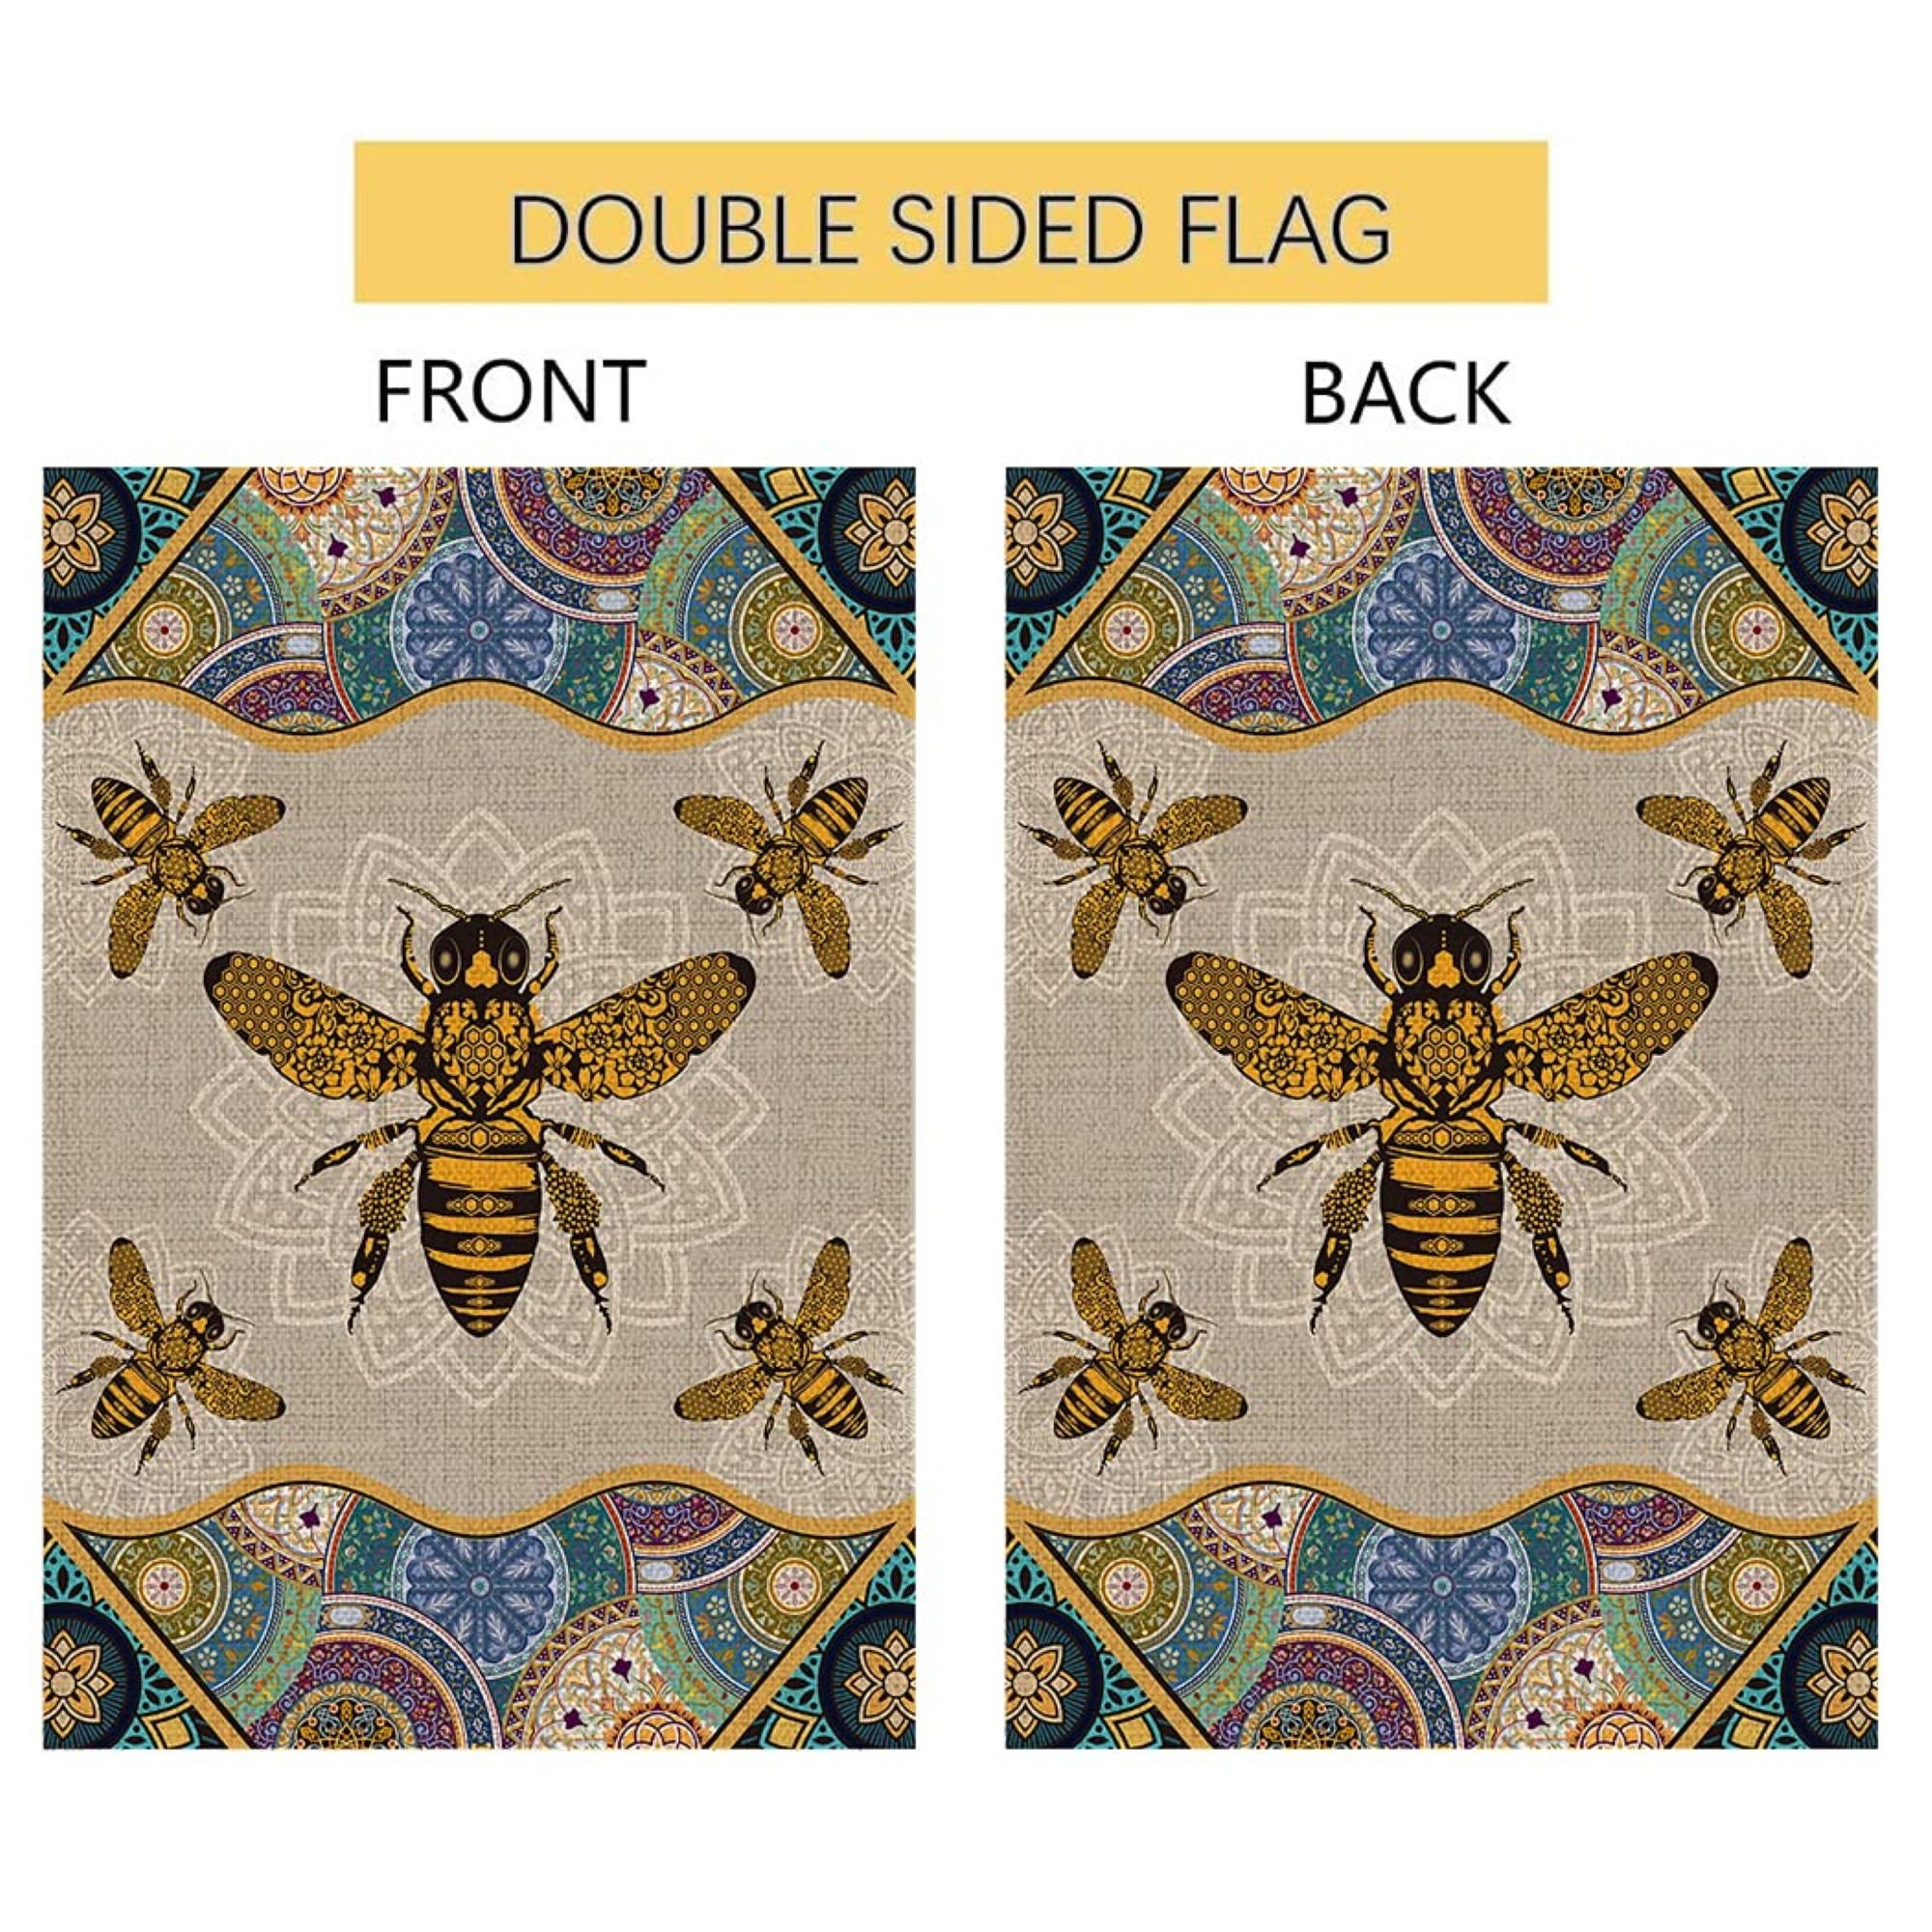 Discover Vintage Bee Flag